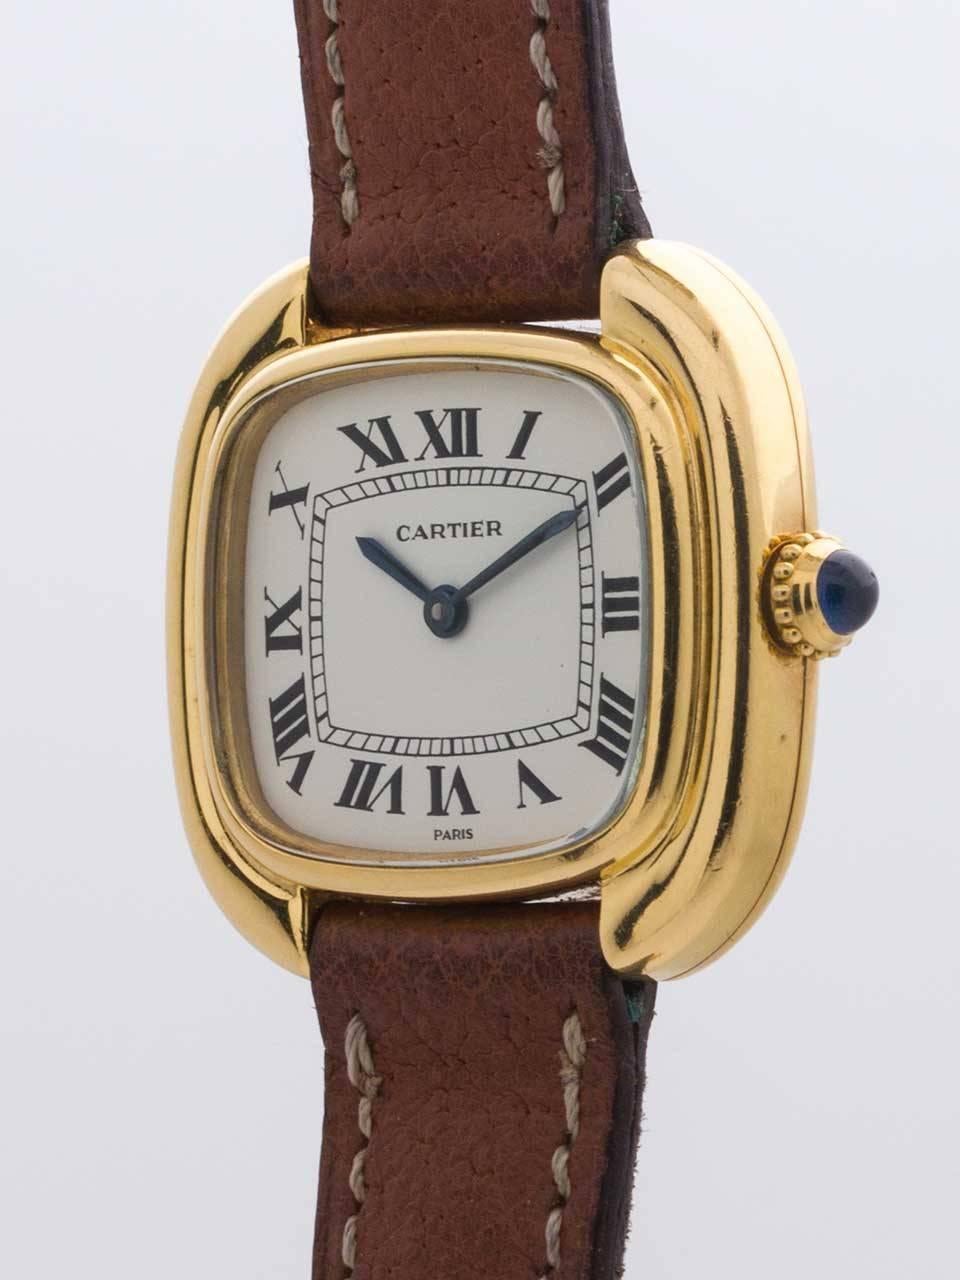 Cartier Lady’s Gondole 18K Yellow Gold circa 1970s. 27 x 25mm stepped case with blue sapphire cabachon crown. White dial with printed black Arabic numerals and blue steeled hands. Powered by battery quartz movement. On short brown leather signed